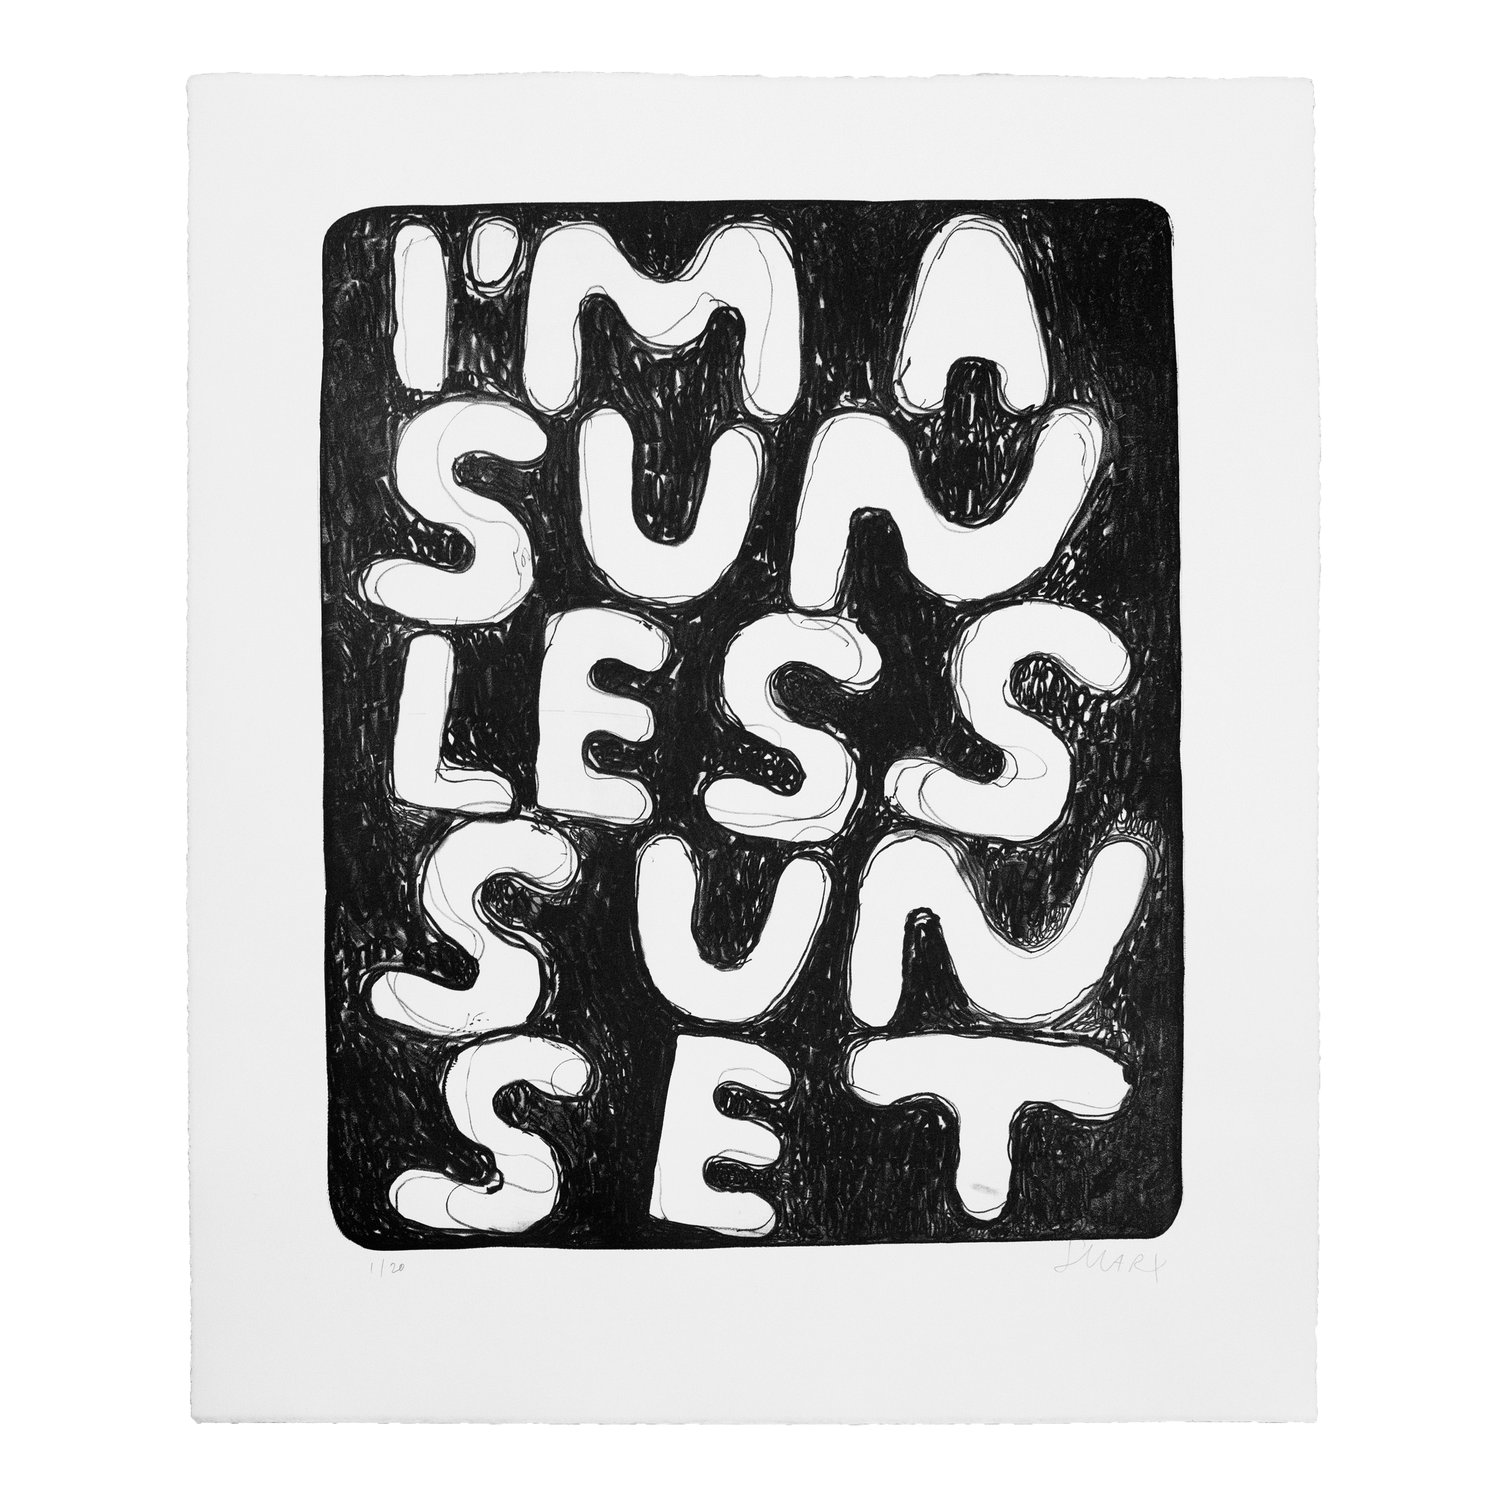 I’m a Sunless Sunset, 2020 by Stefan Marx 